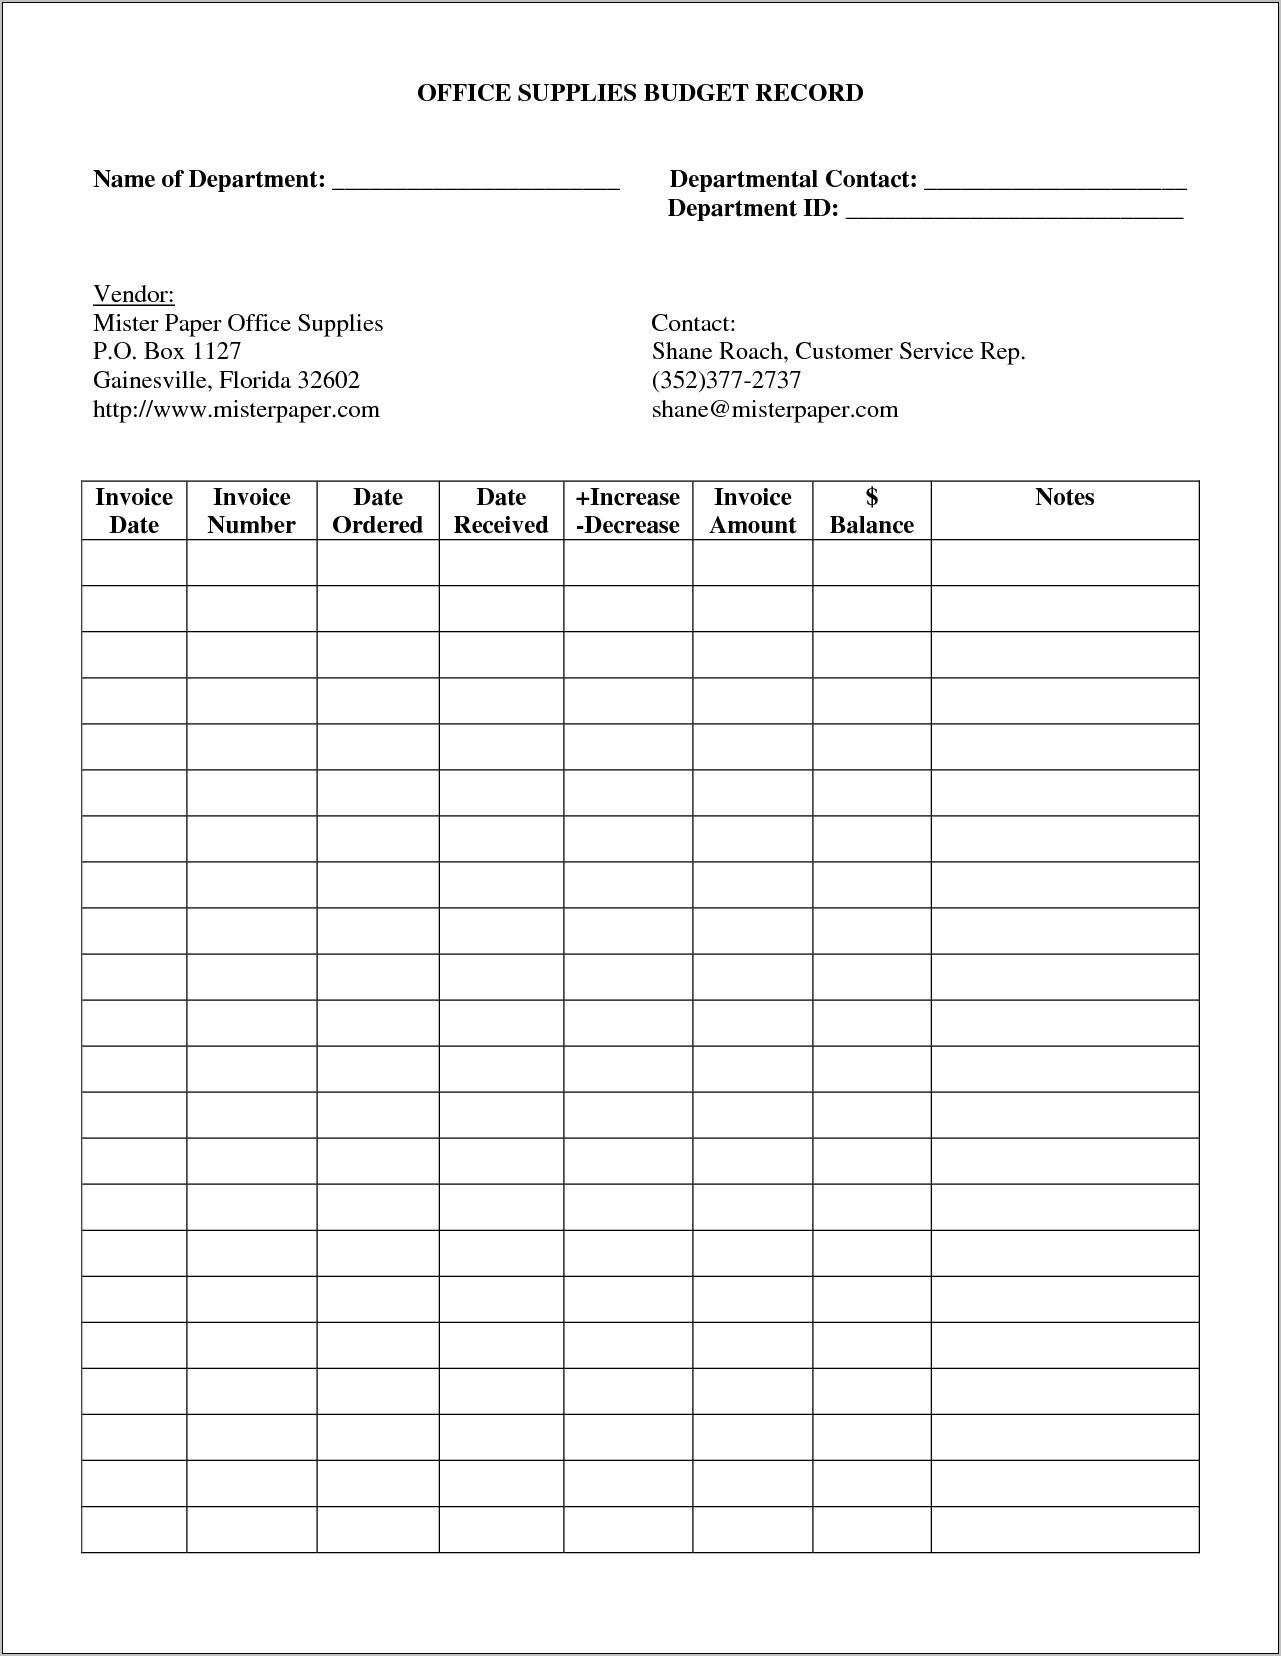 Office Safety Checklist Template